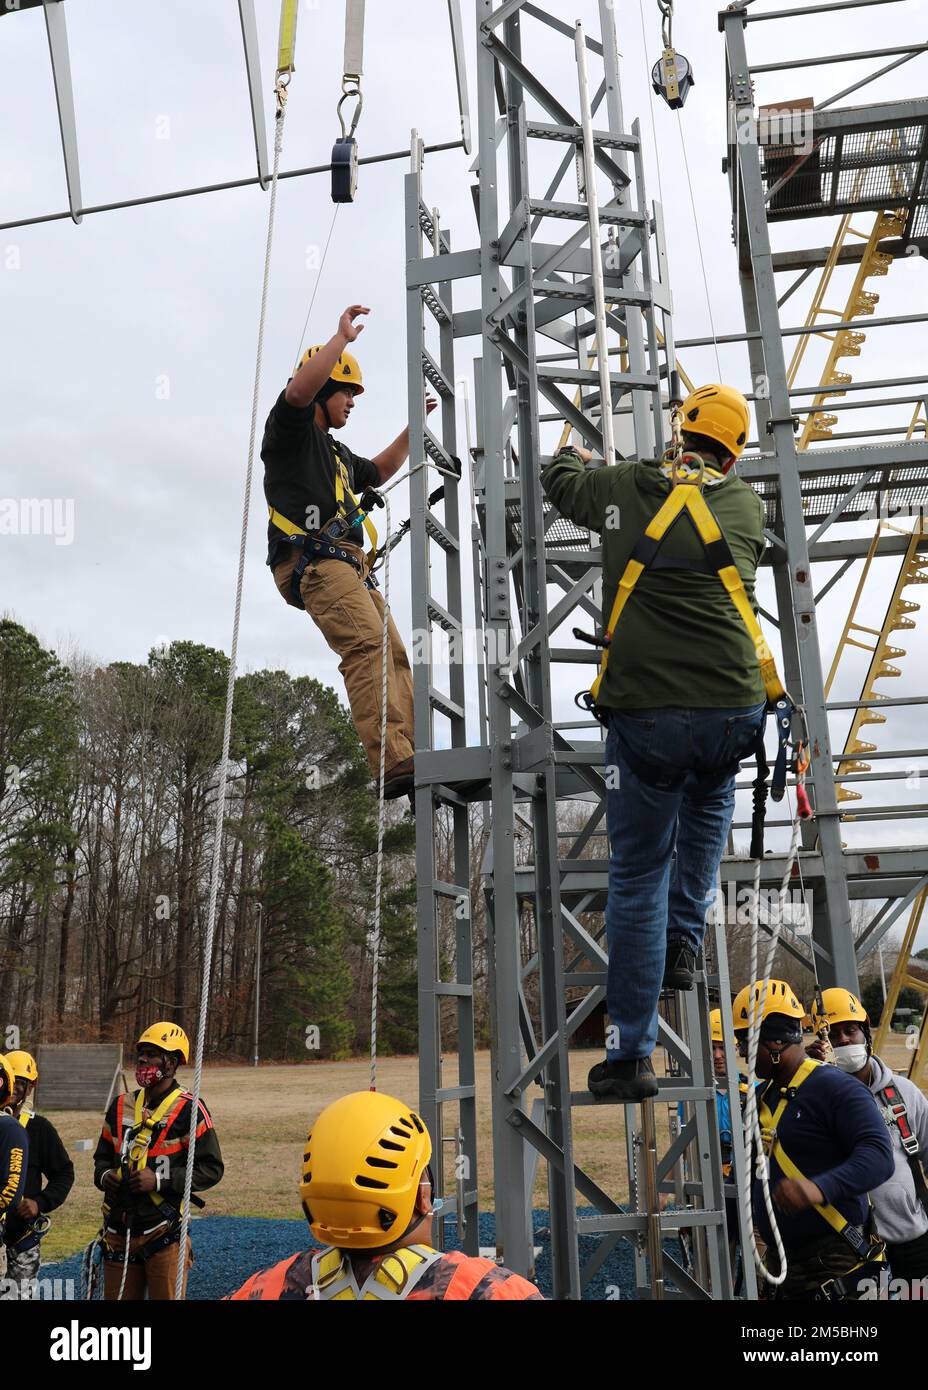 220222-N-OH262-0499--FORT EUSTIS, Va. (February 22, 2022)-- Newly hired Civil Service Mariners (CIVMAR) demonstrate the proper use of safety gear to transit aloft aboard a ship, while attending Basic Training at Military Sealift Command Training Center East on Joint Base Langley-Fort Eustis, Virginia, Feb. 22. The training was part of the MSC Fall Protection curriculum, which must be successfully completed prior to sailing in MSC's fleet of ships. Stock Photo